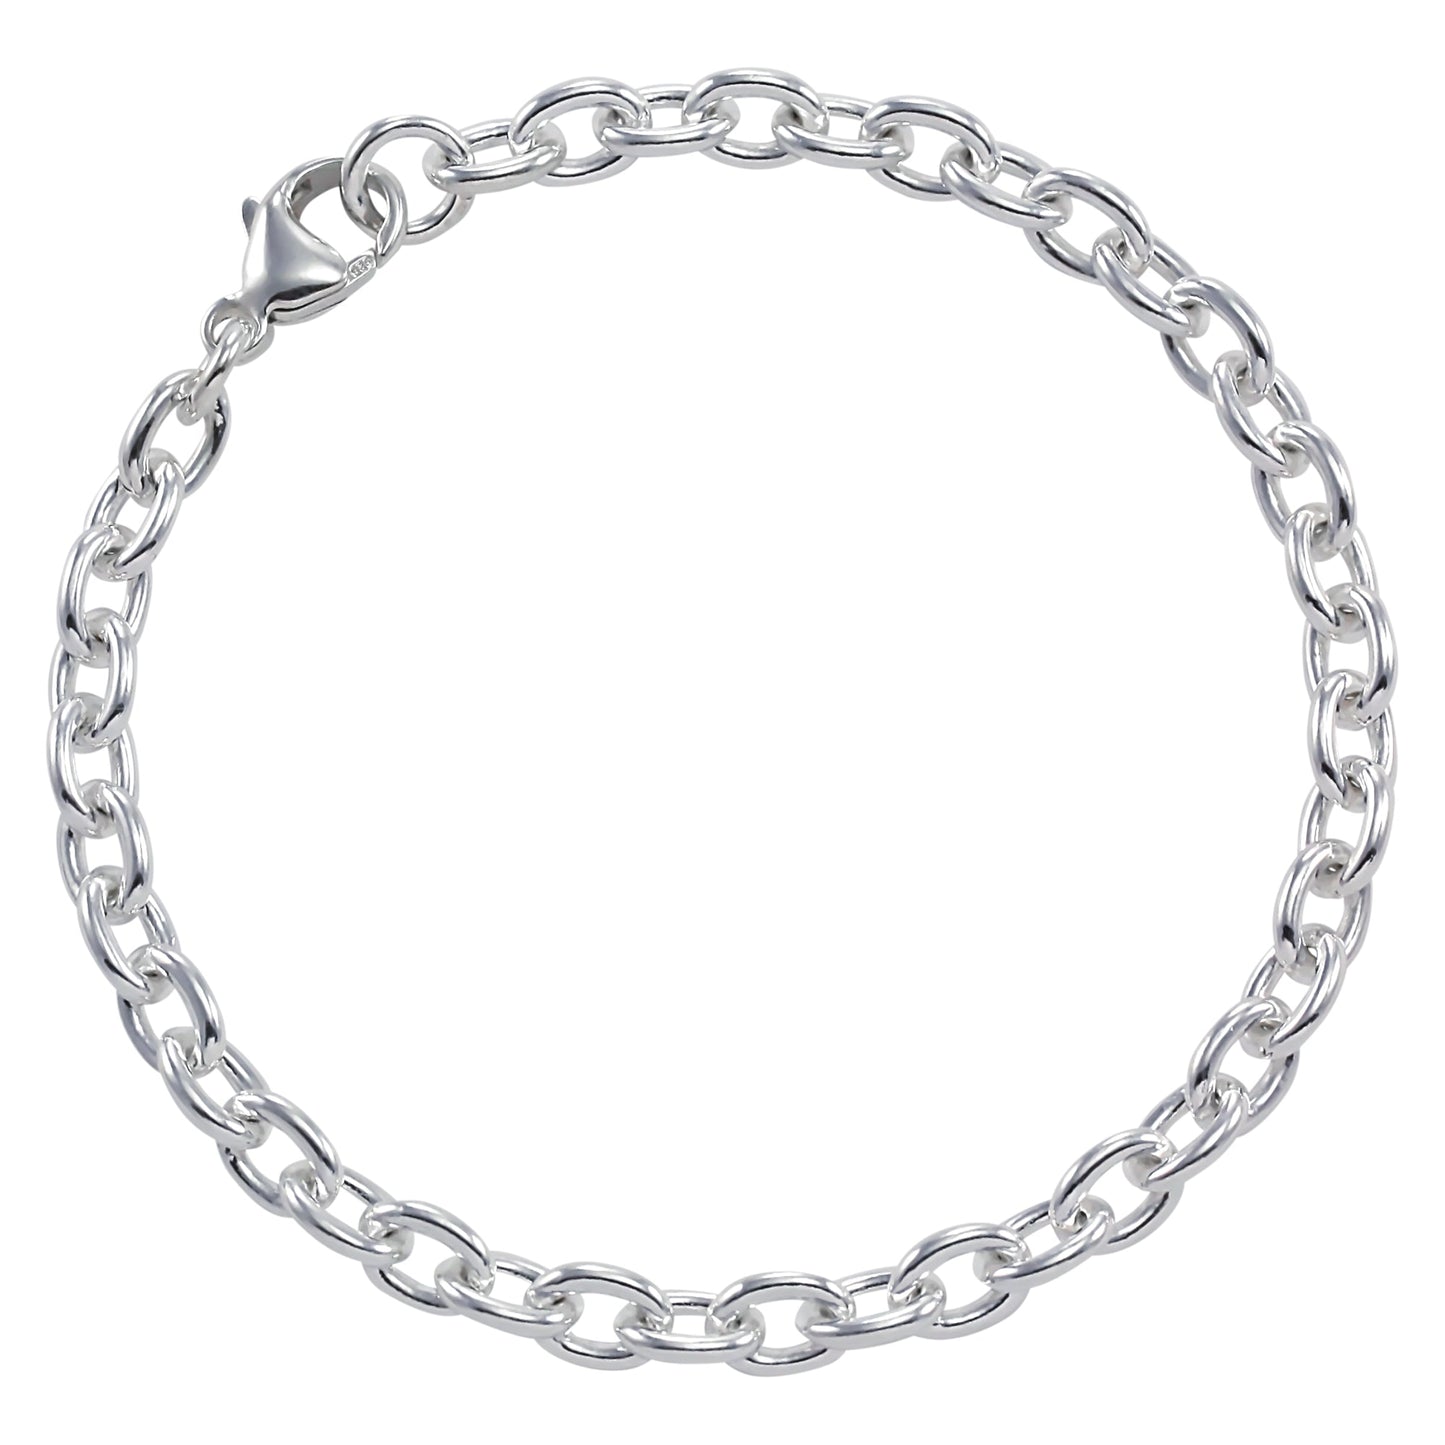 Sterling Silver Cable Chain Bracelet with Clasp